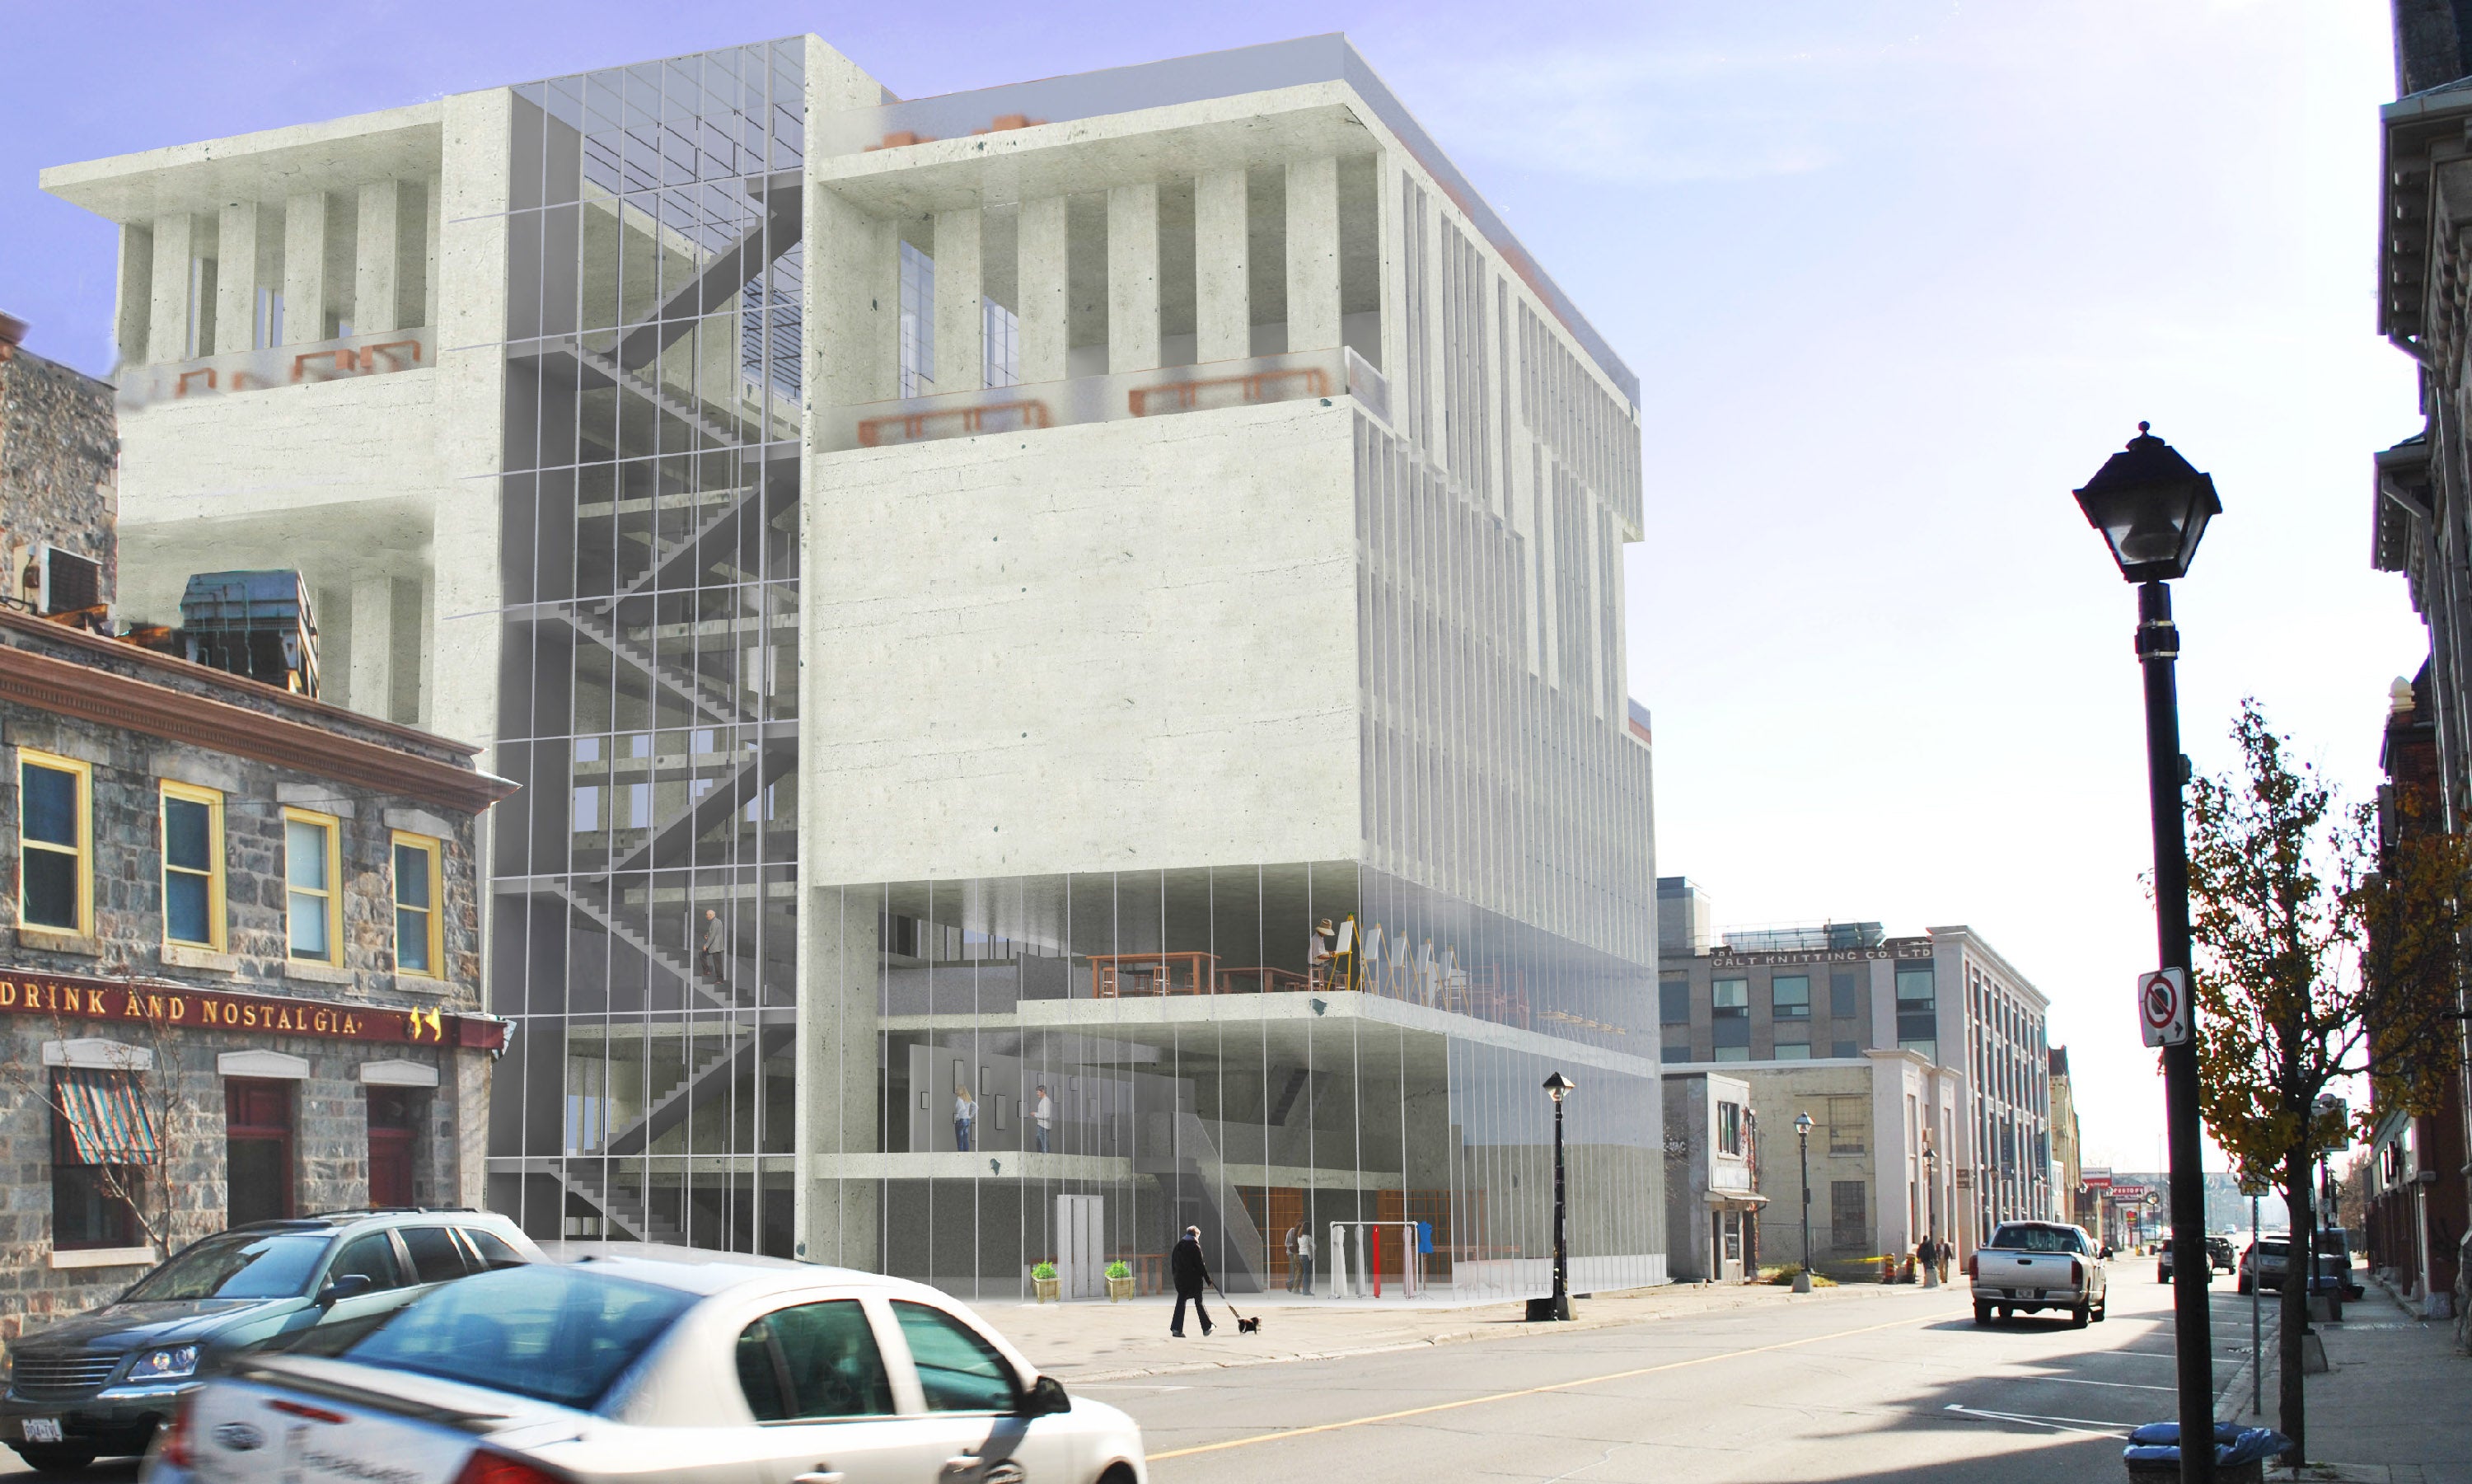 An exterior street view render of the building. The design is rather block-ish in form, completed with glass facades.